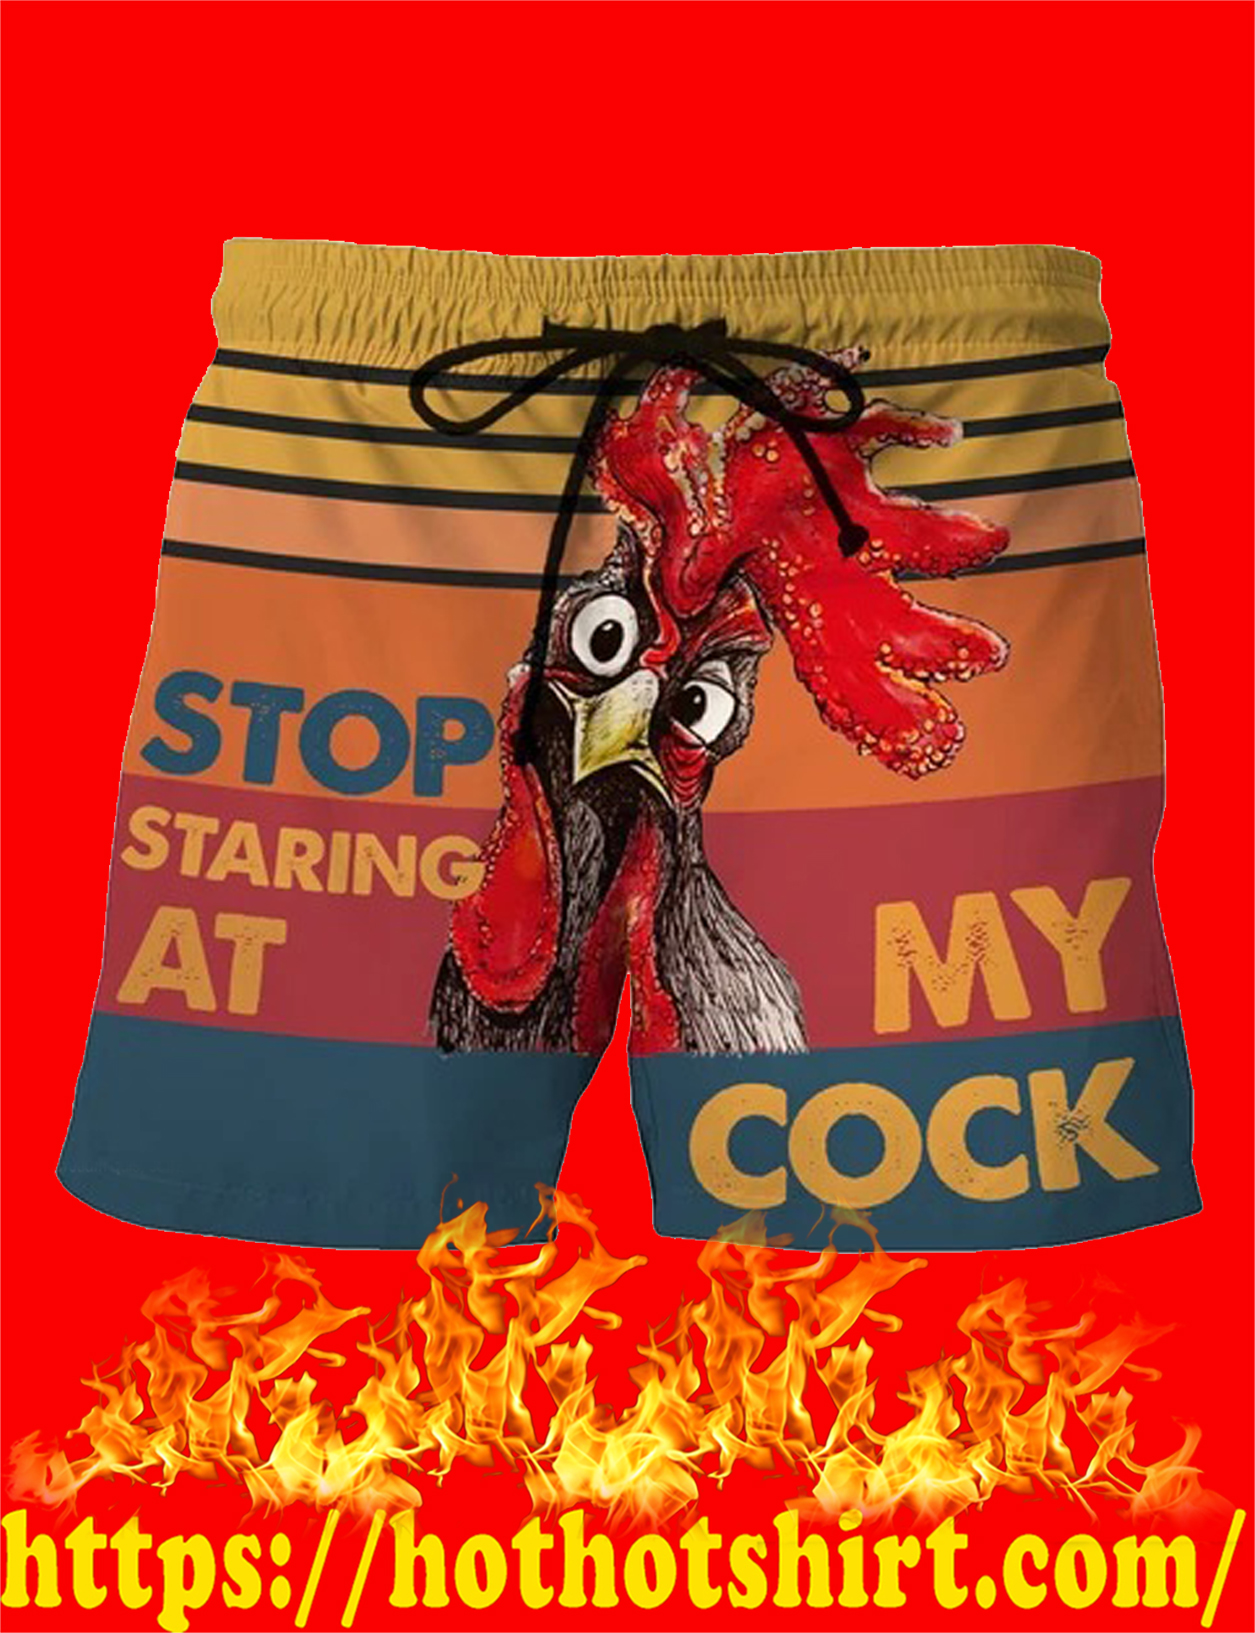 Cock not fit fan pictures